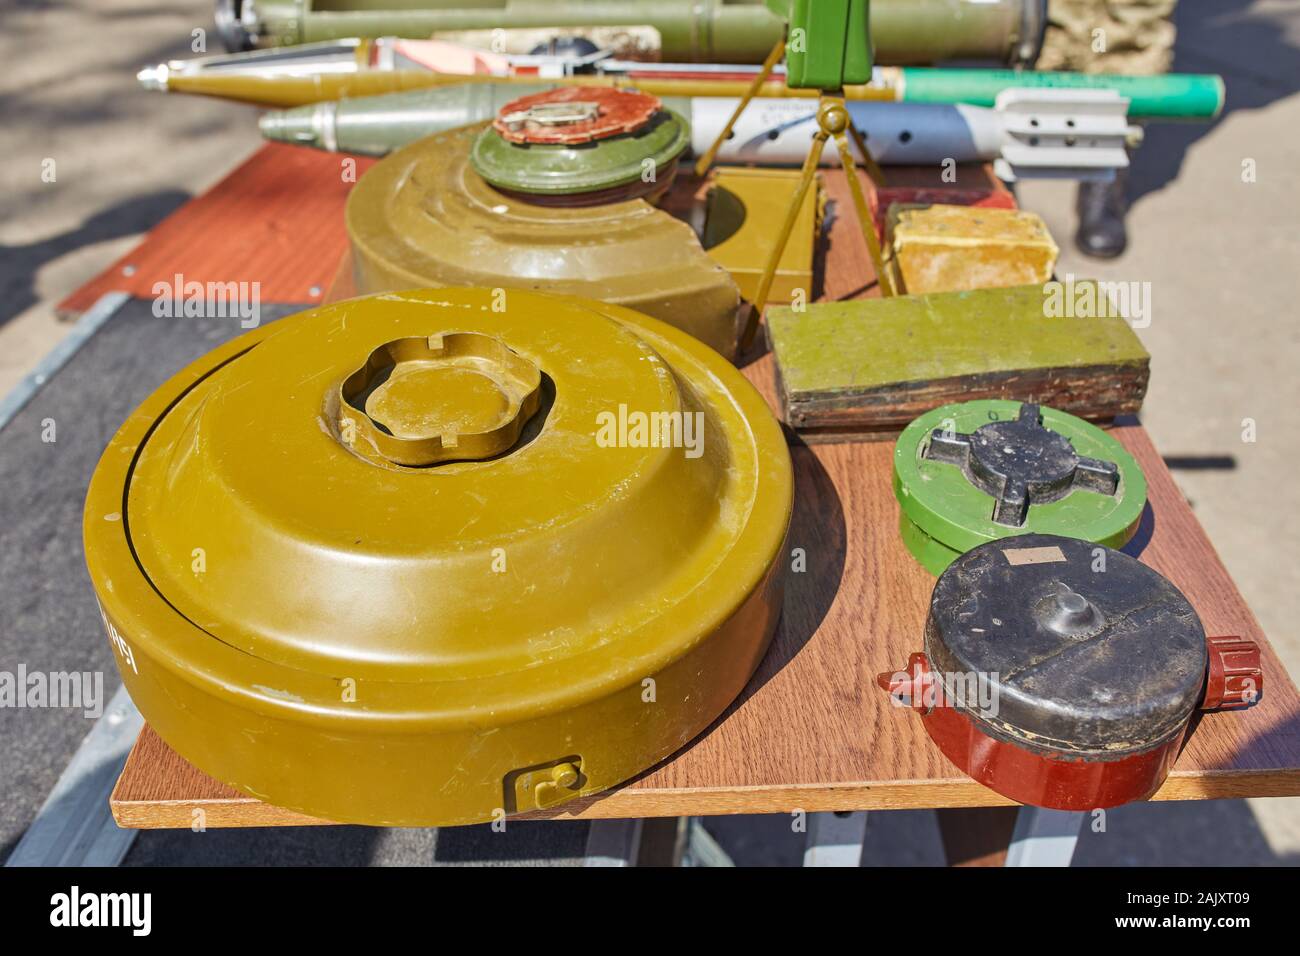 Anti-tank and anti-personnel mines on the stand. Weapons of war in Ukraine Stock Photo